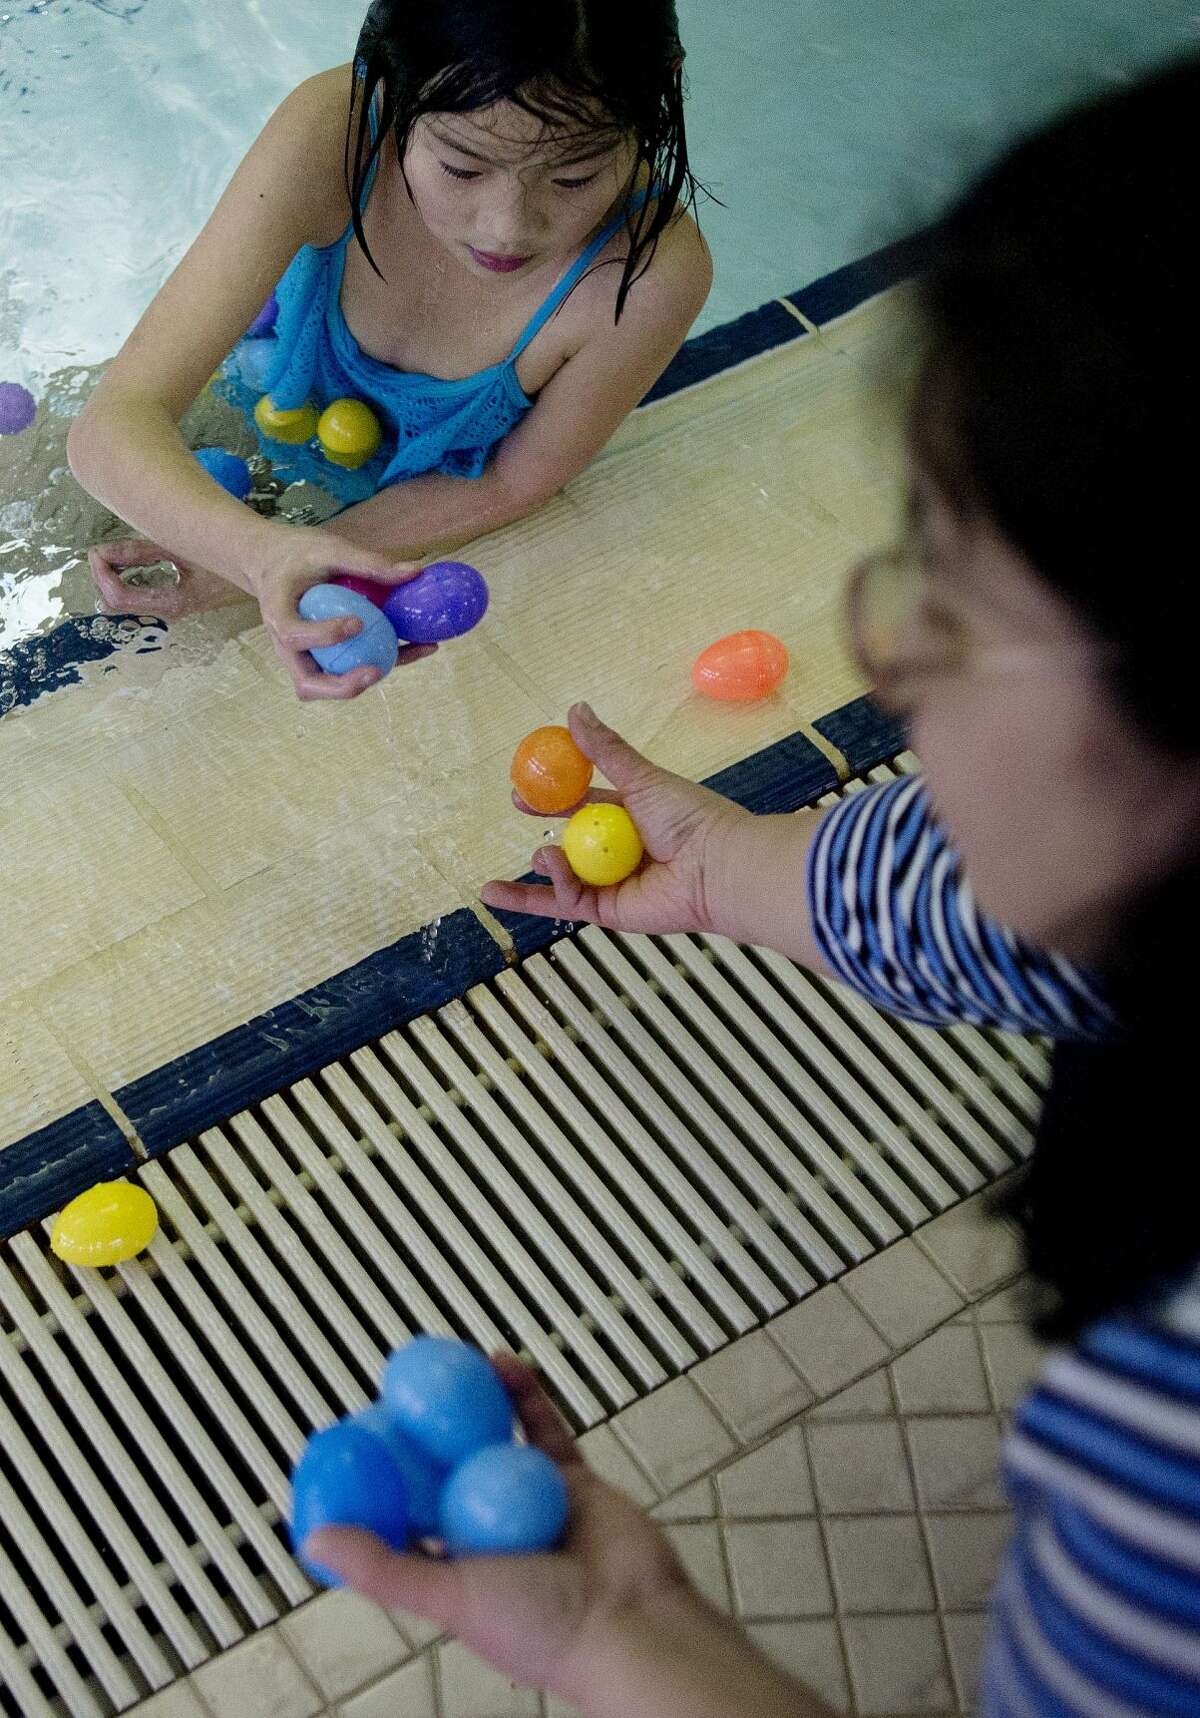 Eleven-year-old Megumi Togashi, top, hands plastic eggs that she collected to her mother, Toko Togashi, both of Midland, during the Easter Egg Dip at the Greater Midland Community Center.